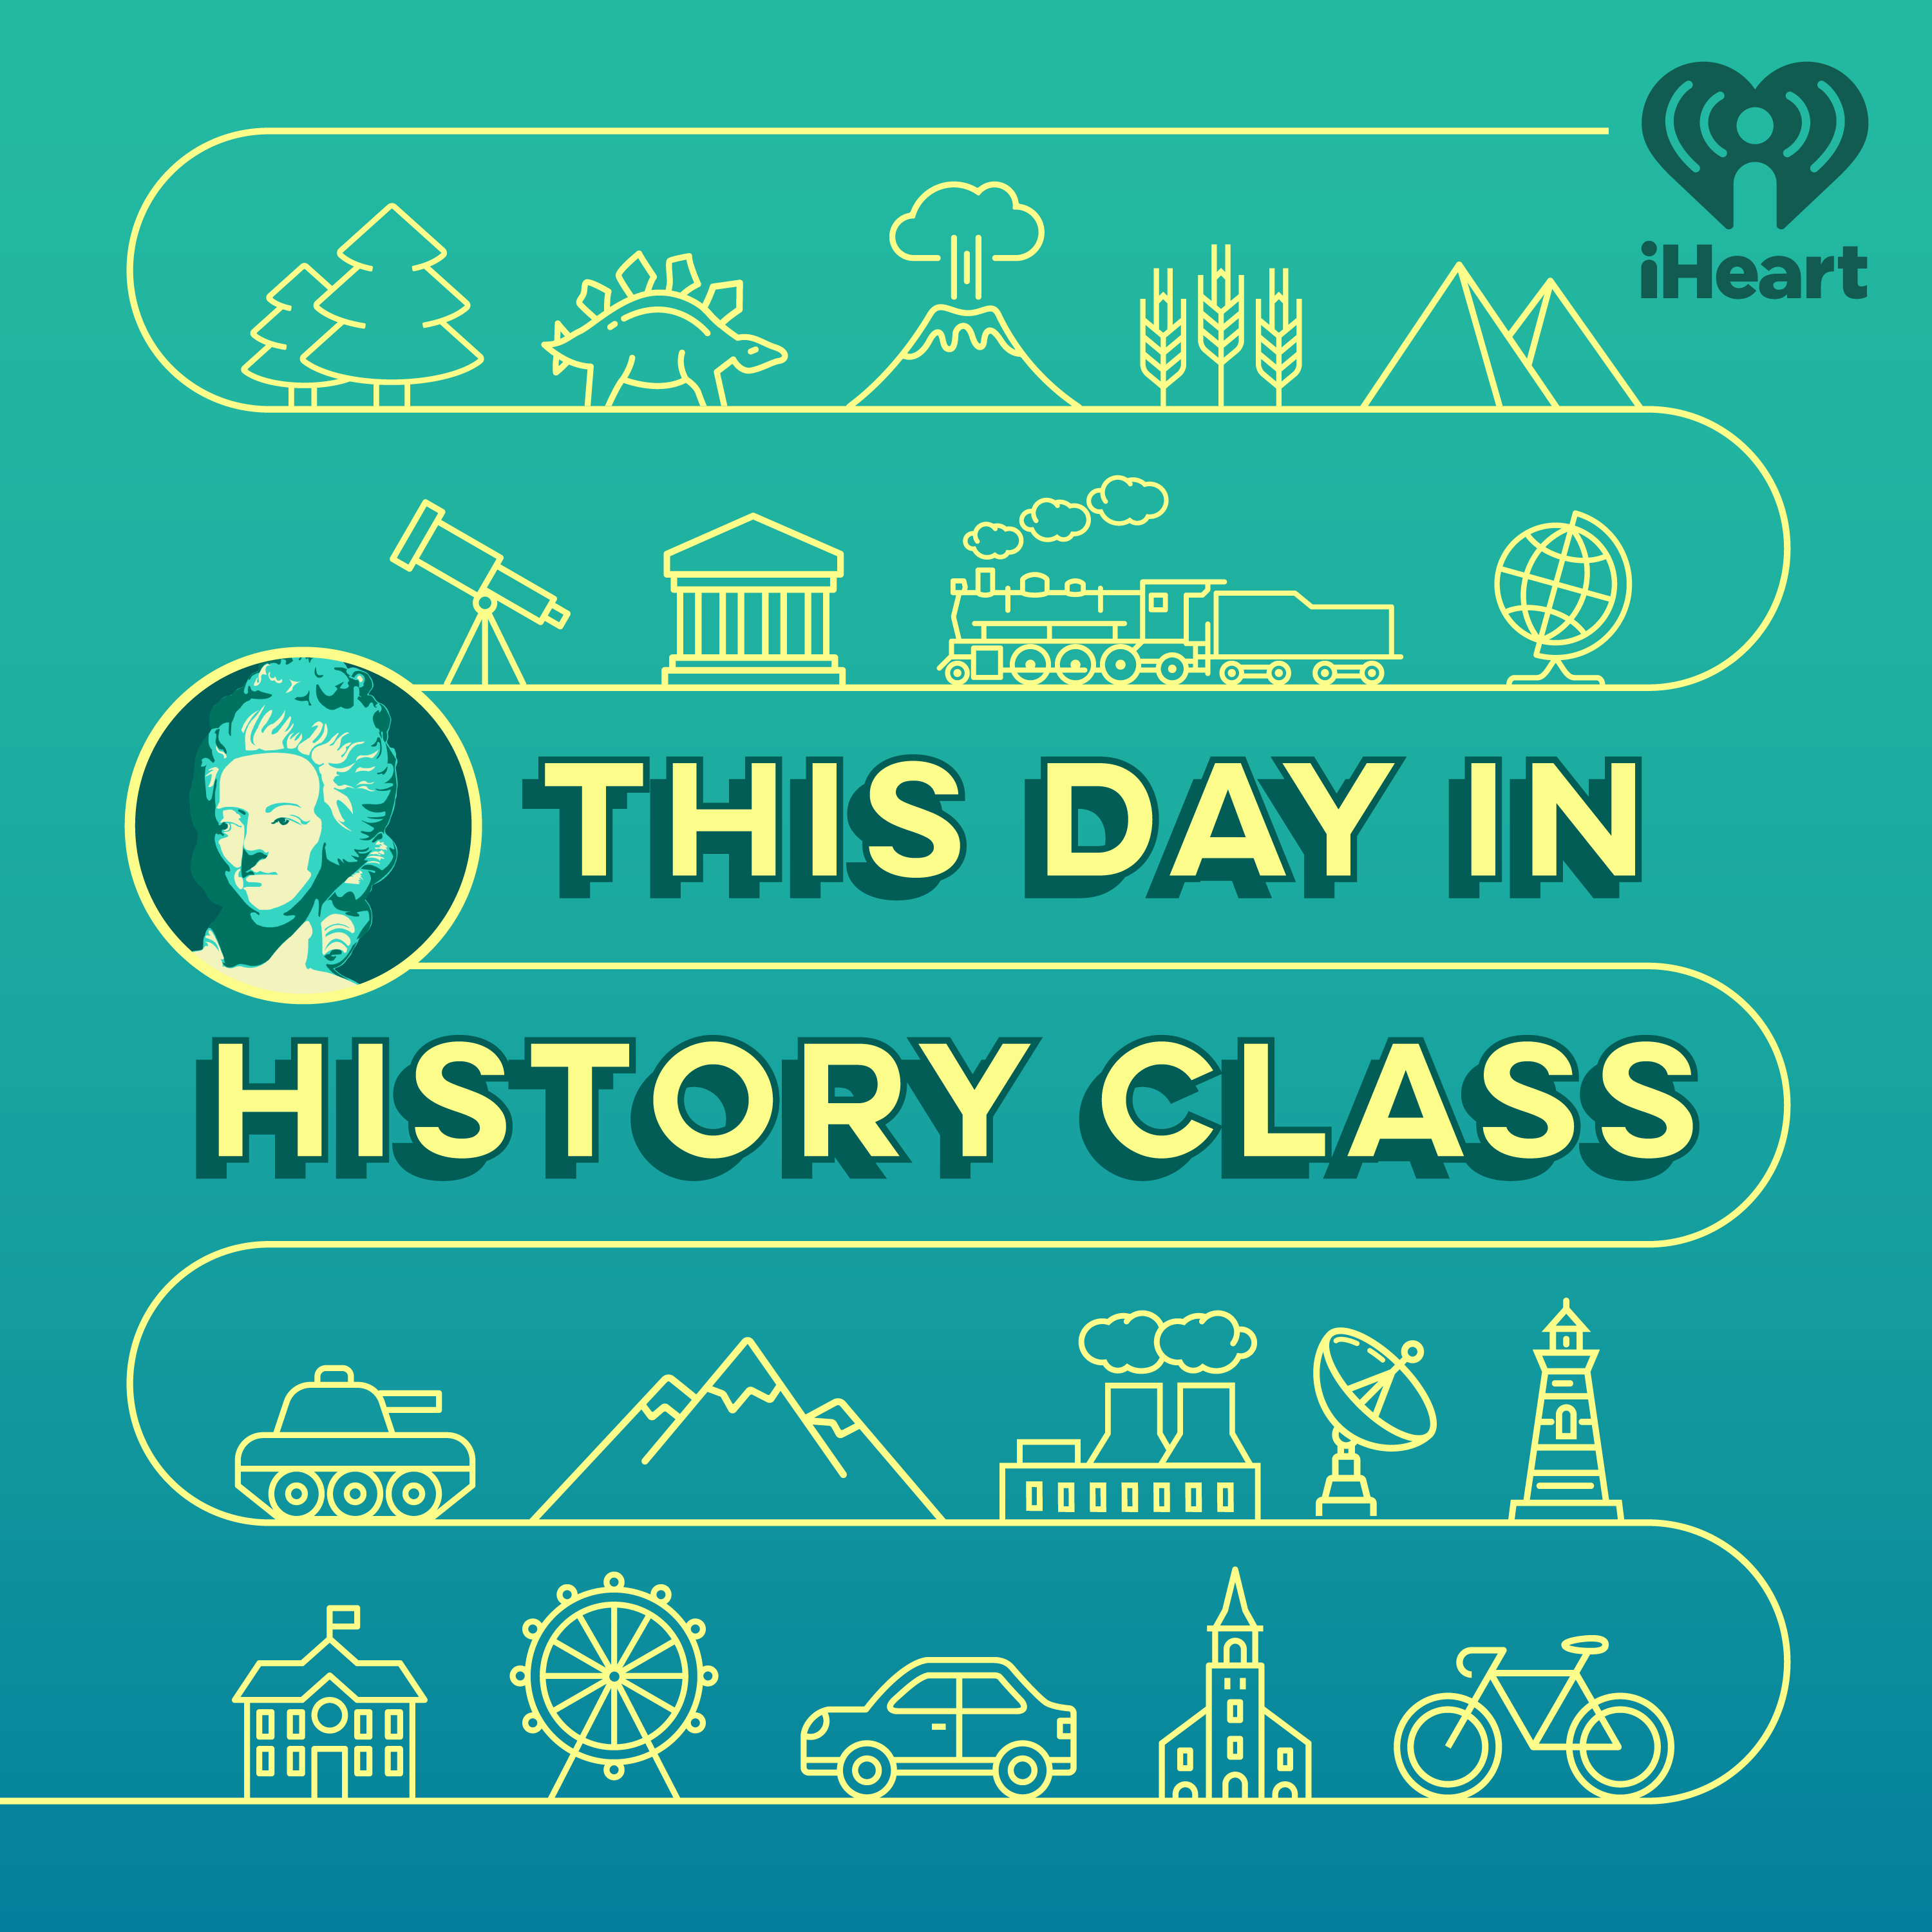 This Day In History Class - December 17th